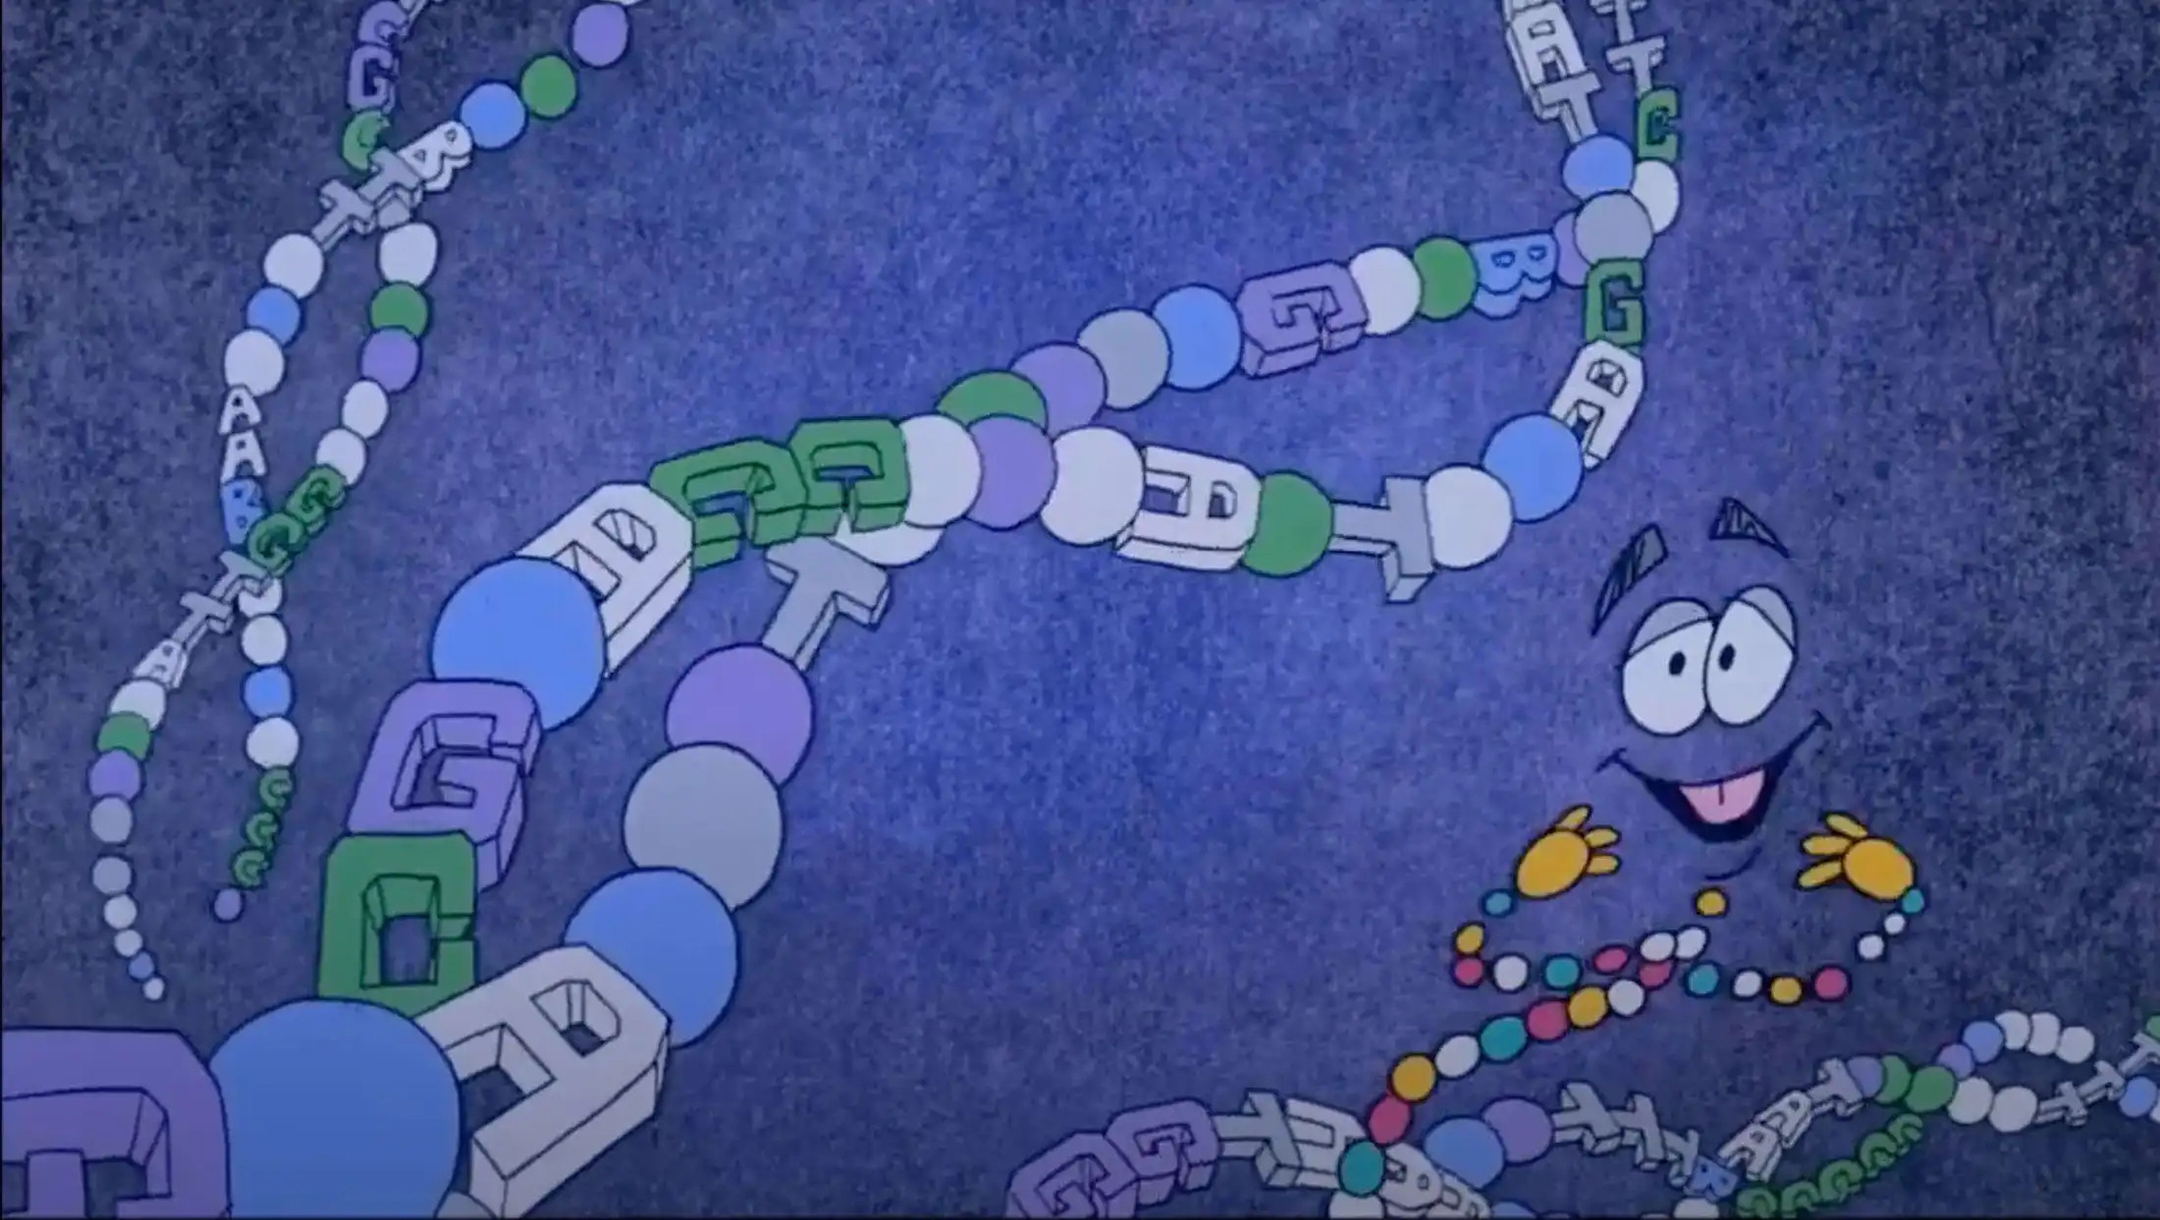 Still from an cartoon showing an animated DNA helix and a comic representation of a DNA helix